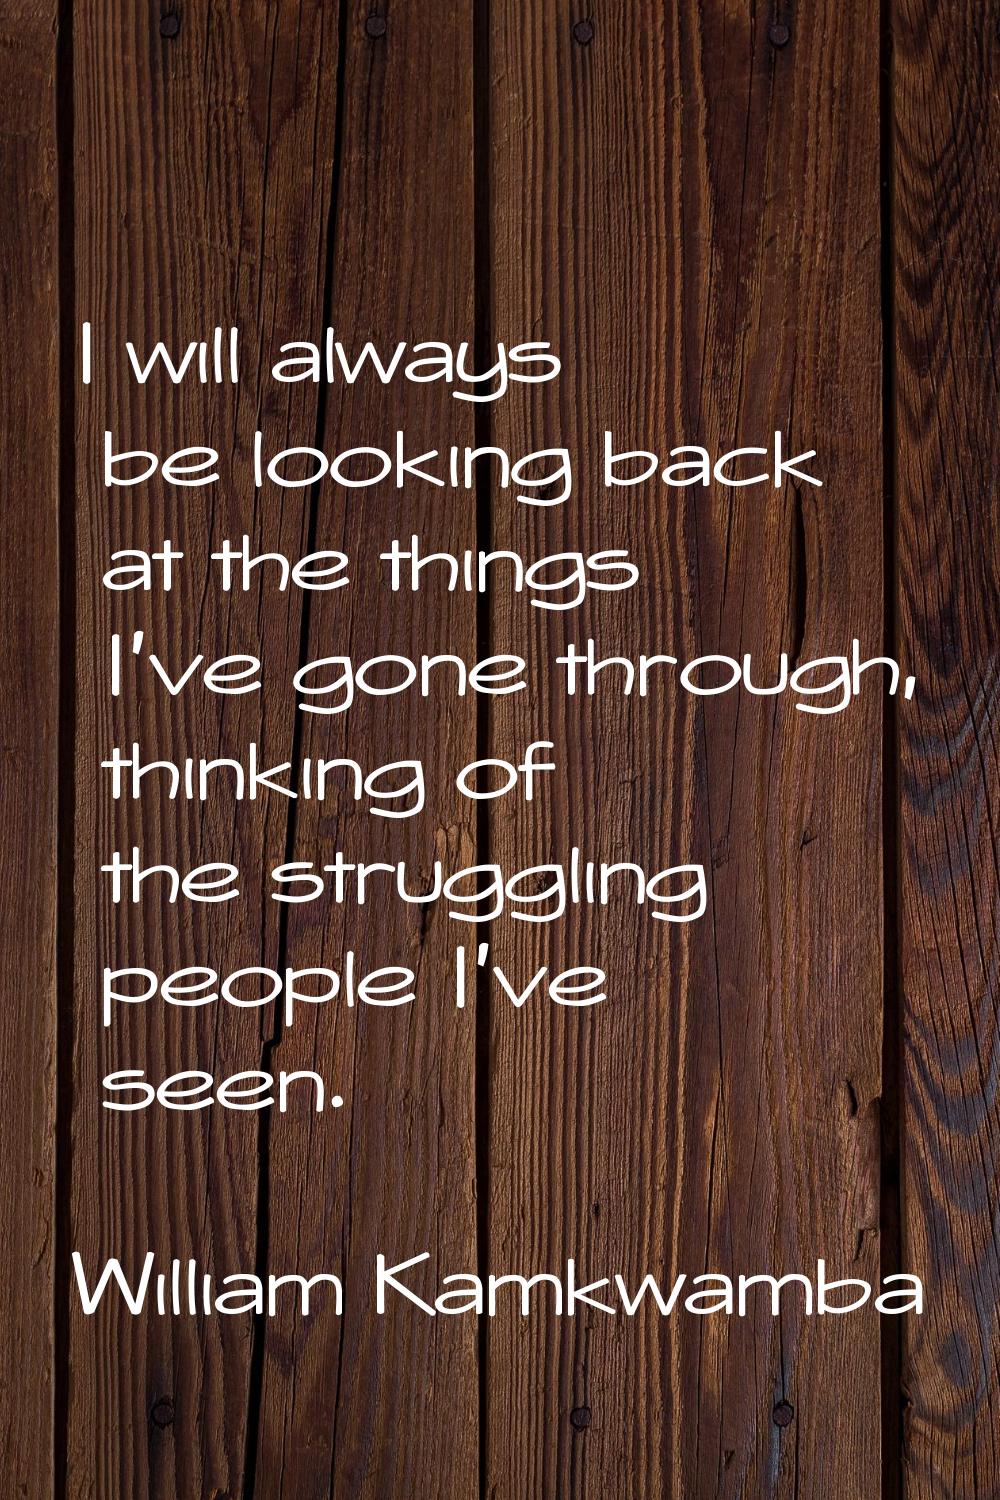 I will always be looking back at the things I've gone through, thinking of the struggling people I'